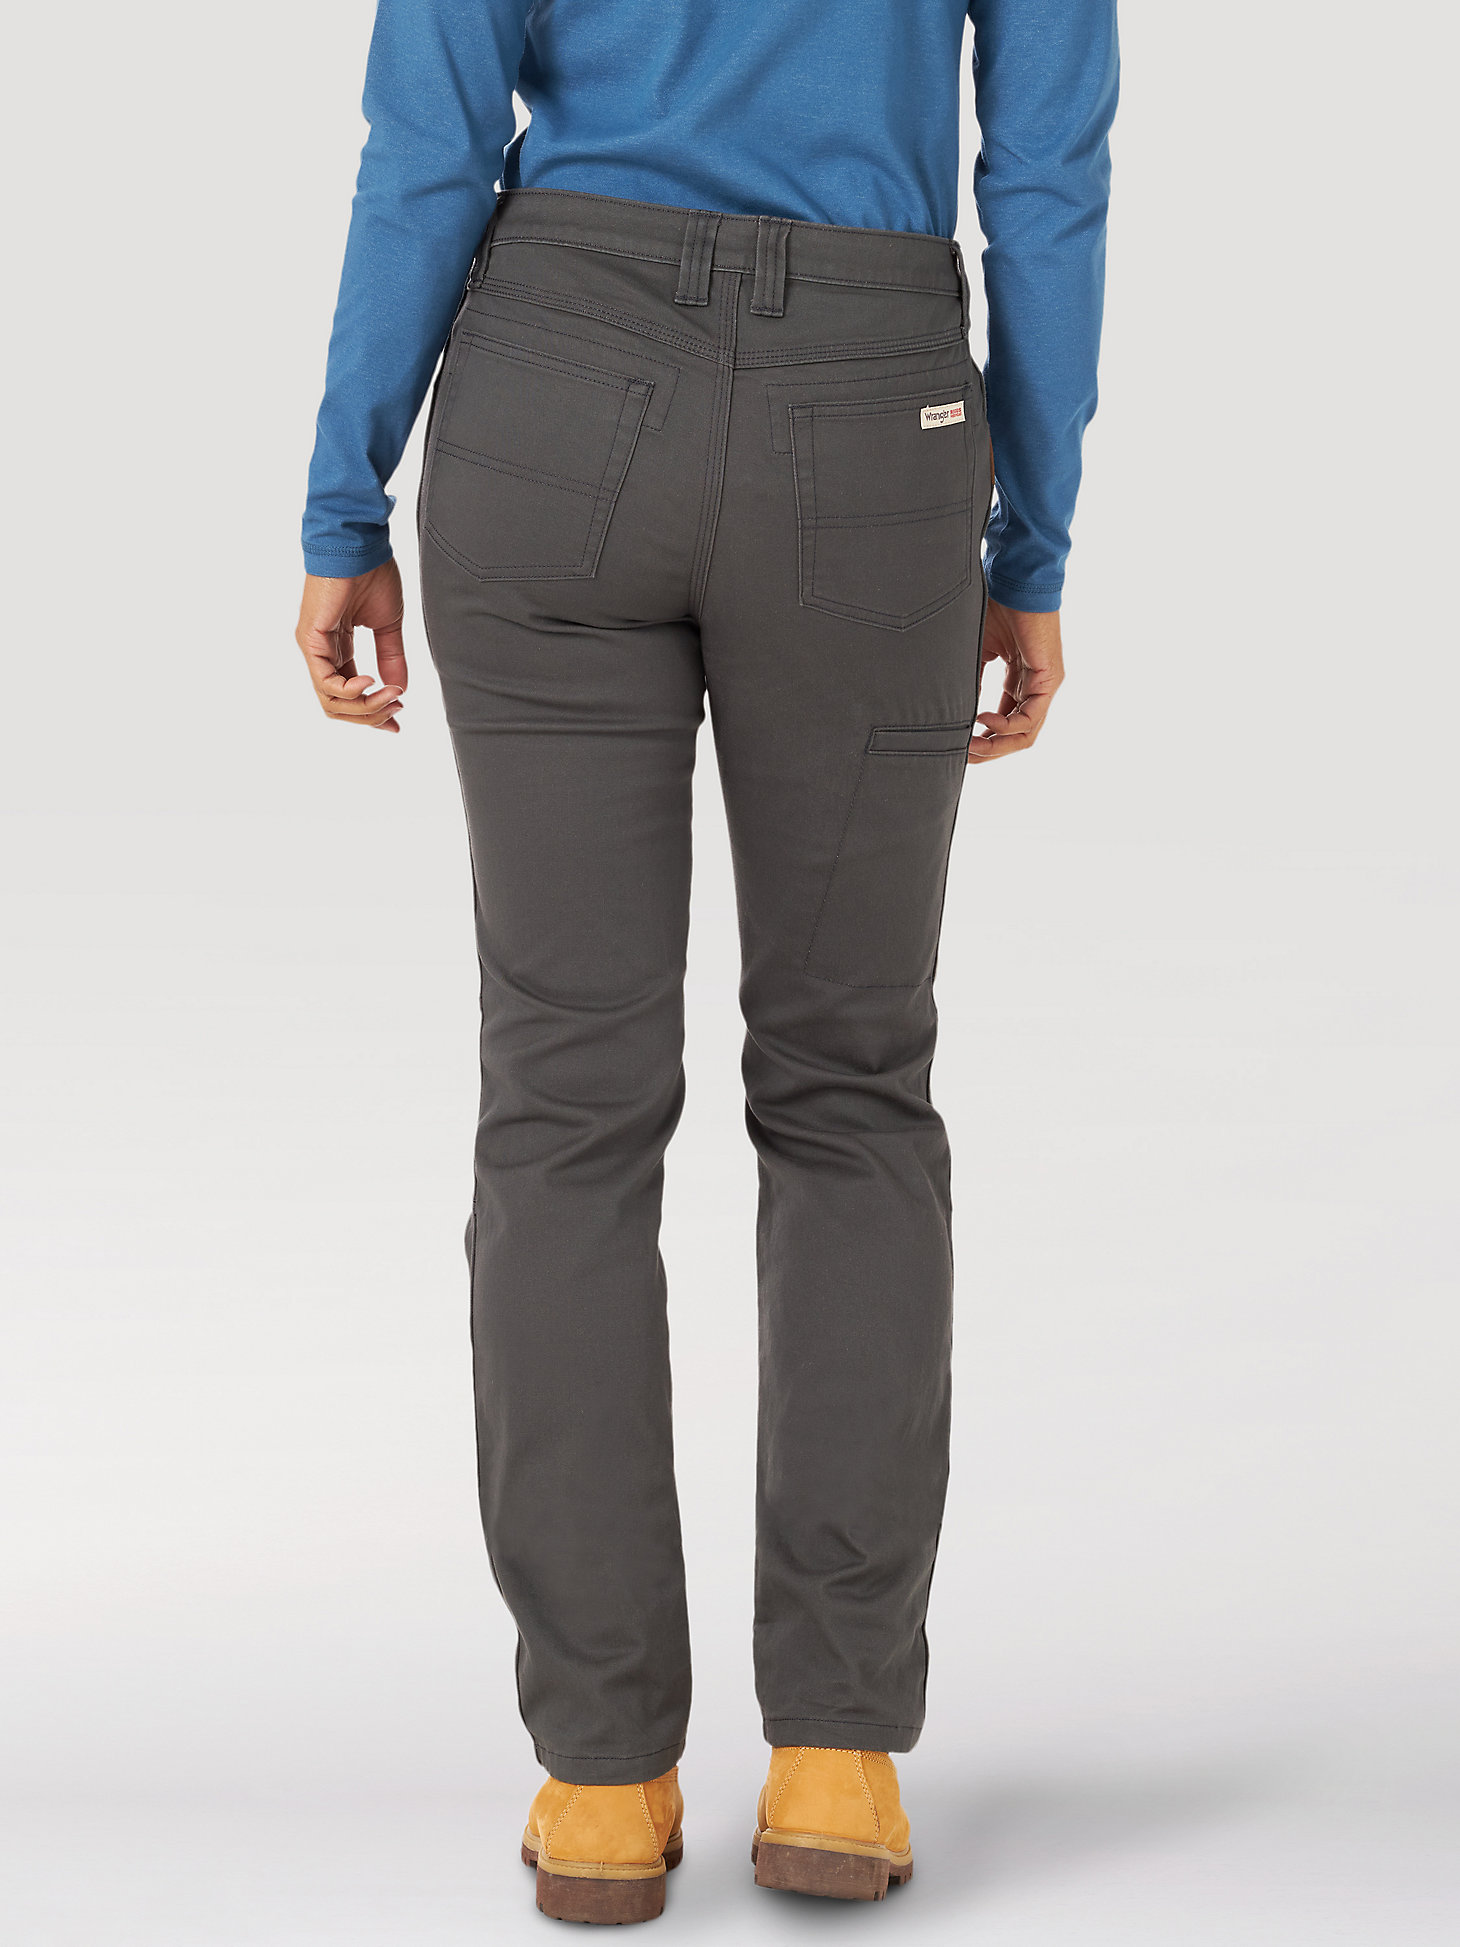 Women's Wrangler® RIGGS Workwear® Single Layer Insulated Work Pant in Grey alternative view 3